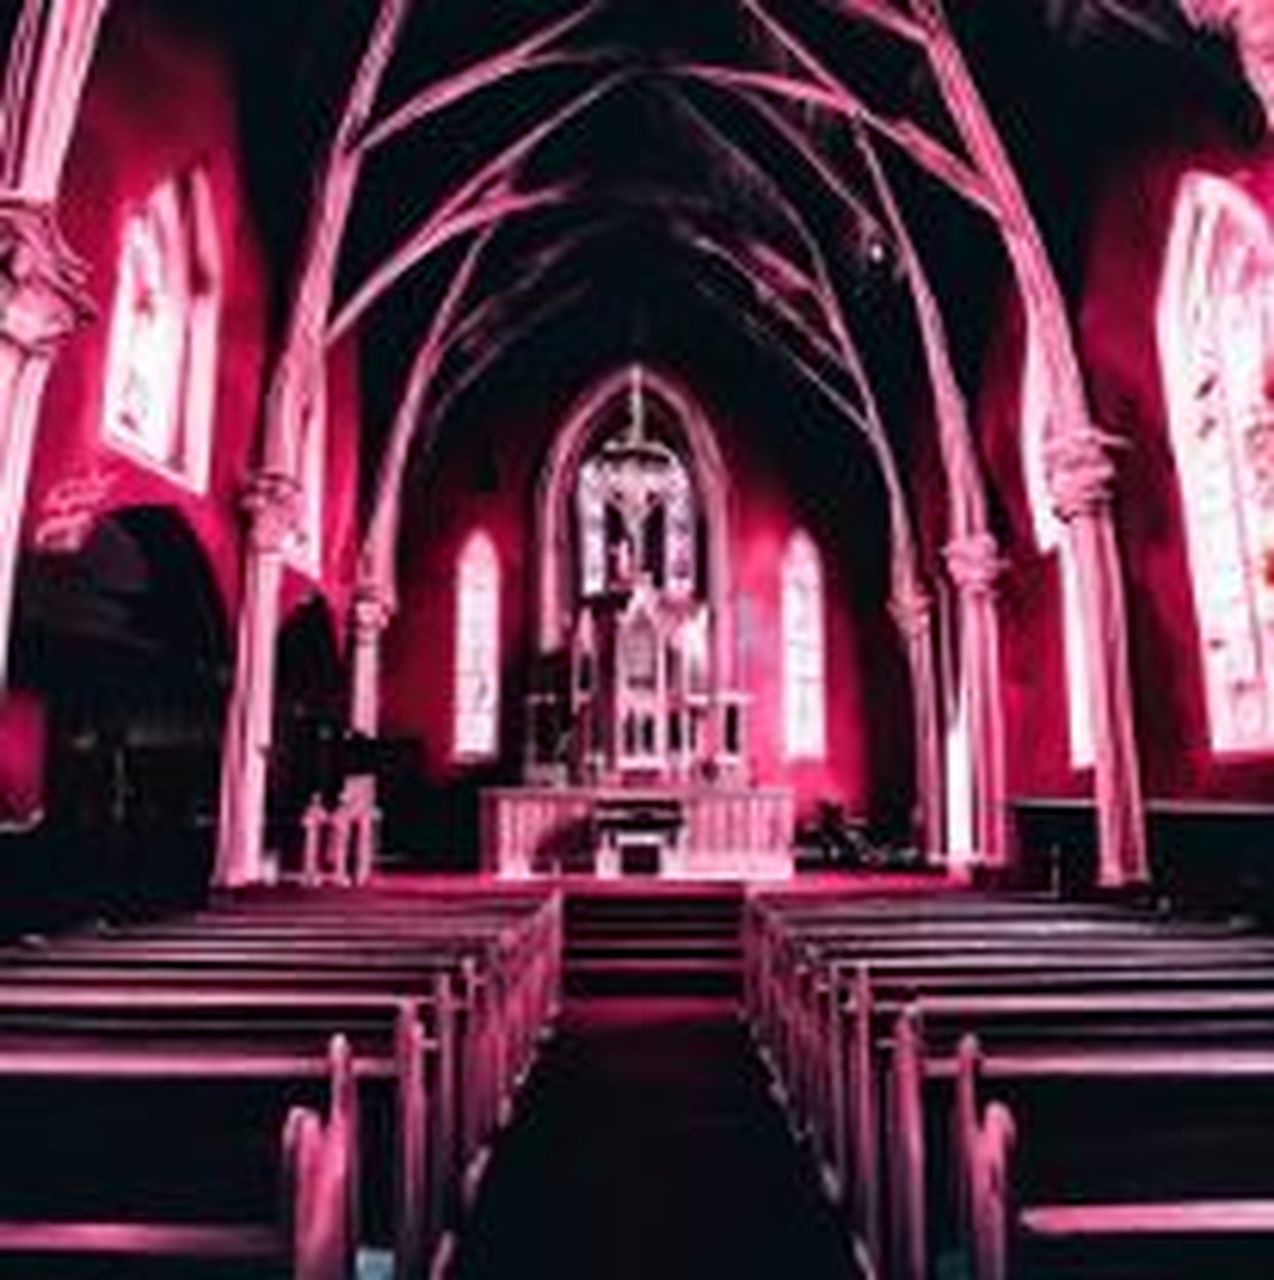 architecture, religion, place of worship, belief, spirituality, built structure, indoors, pew, building, catholicism, arch, no people, worship, altar